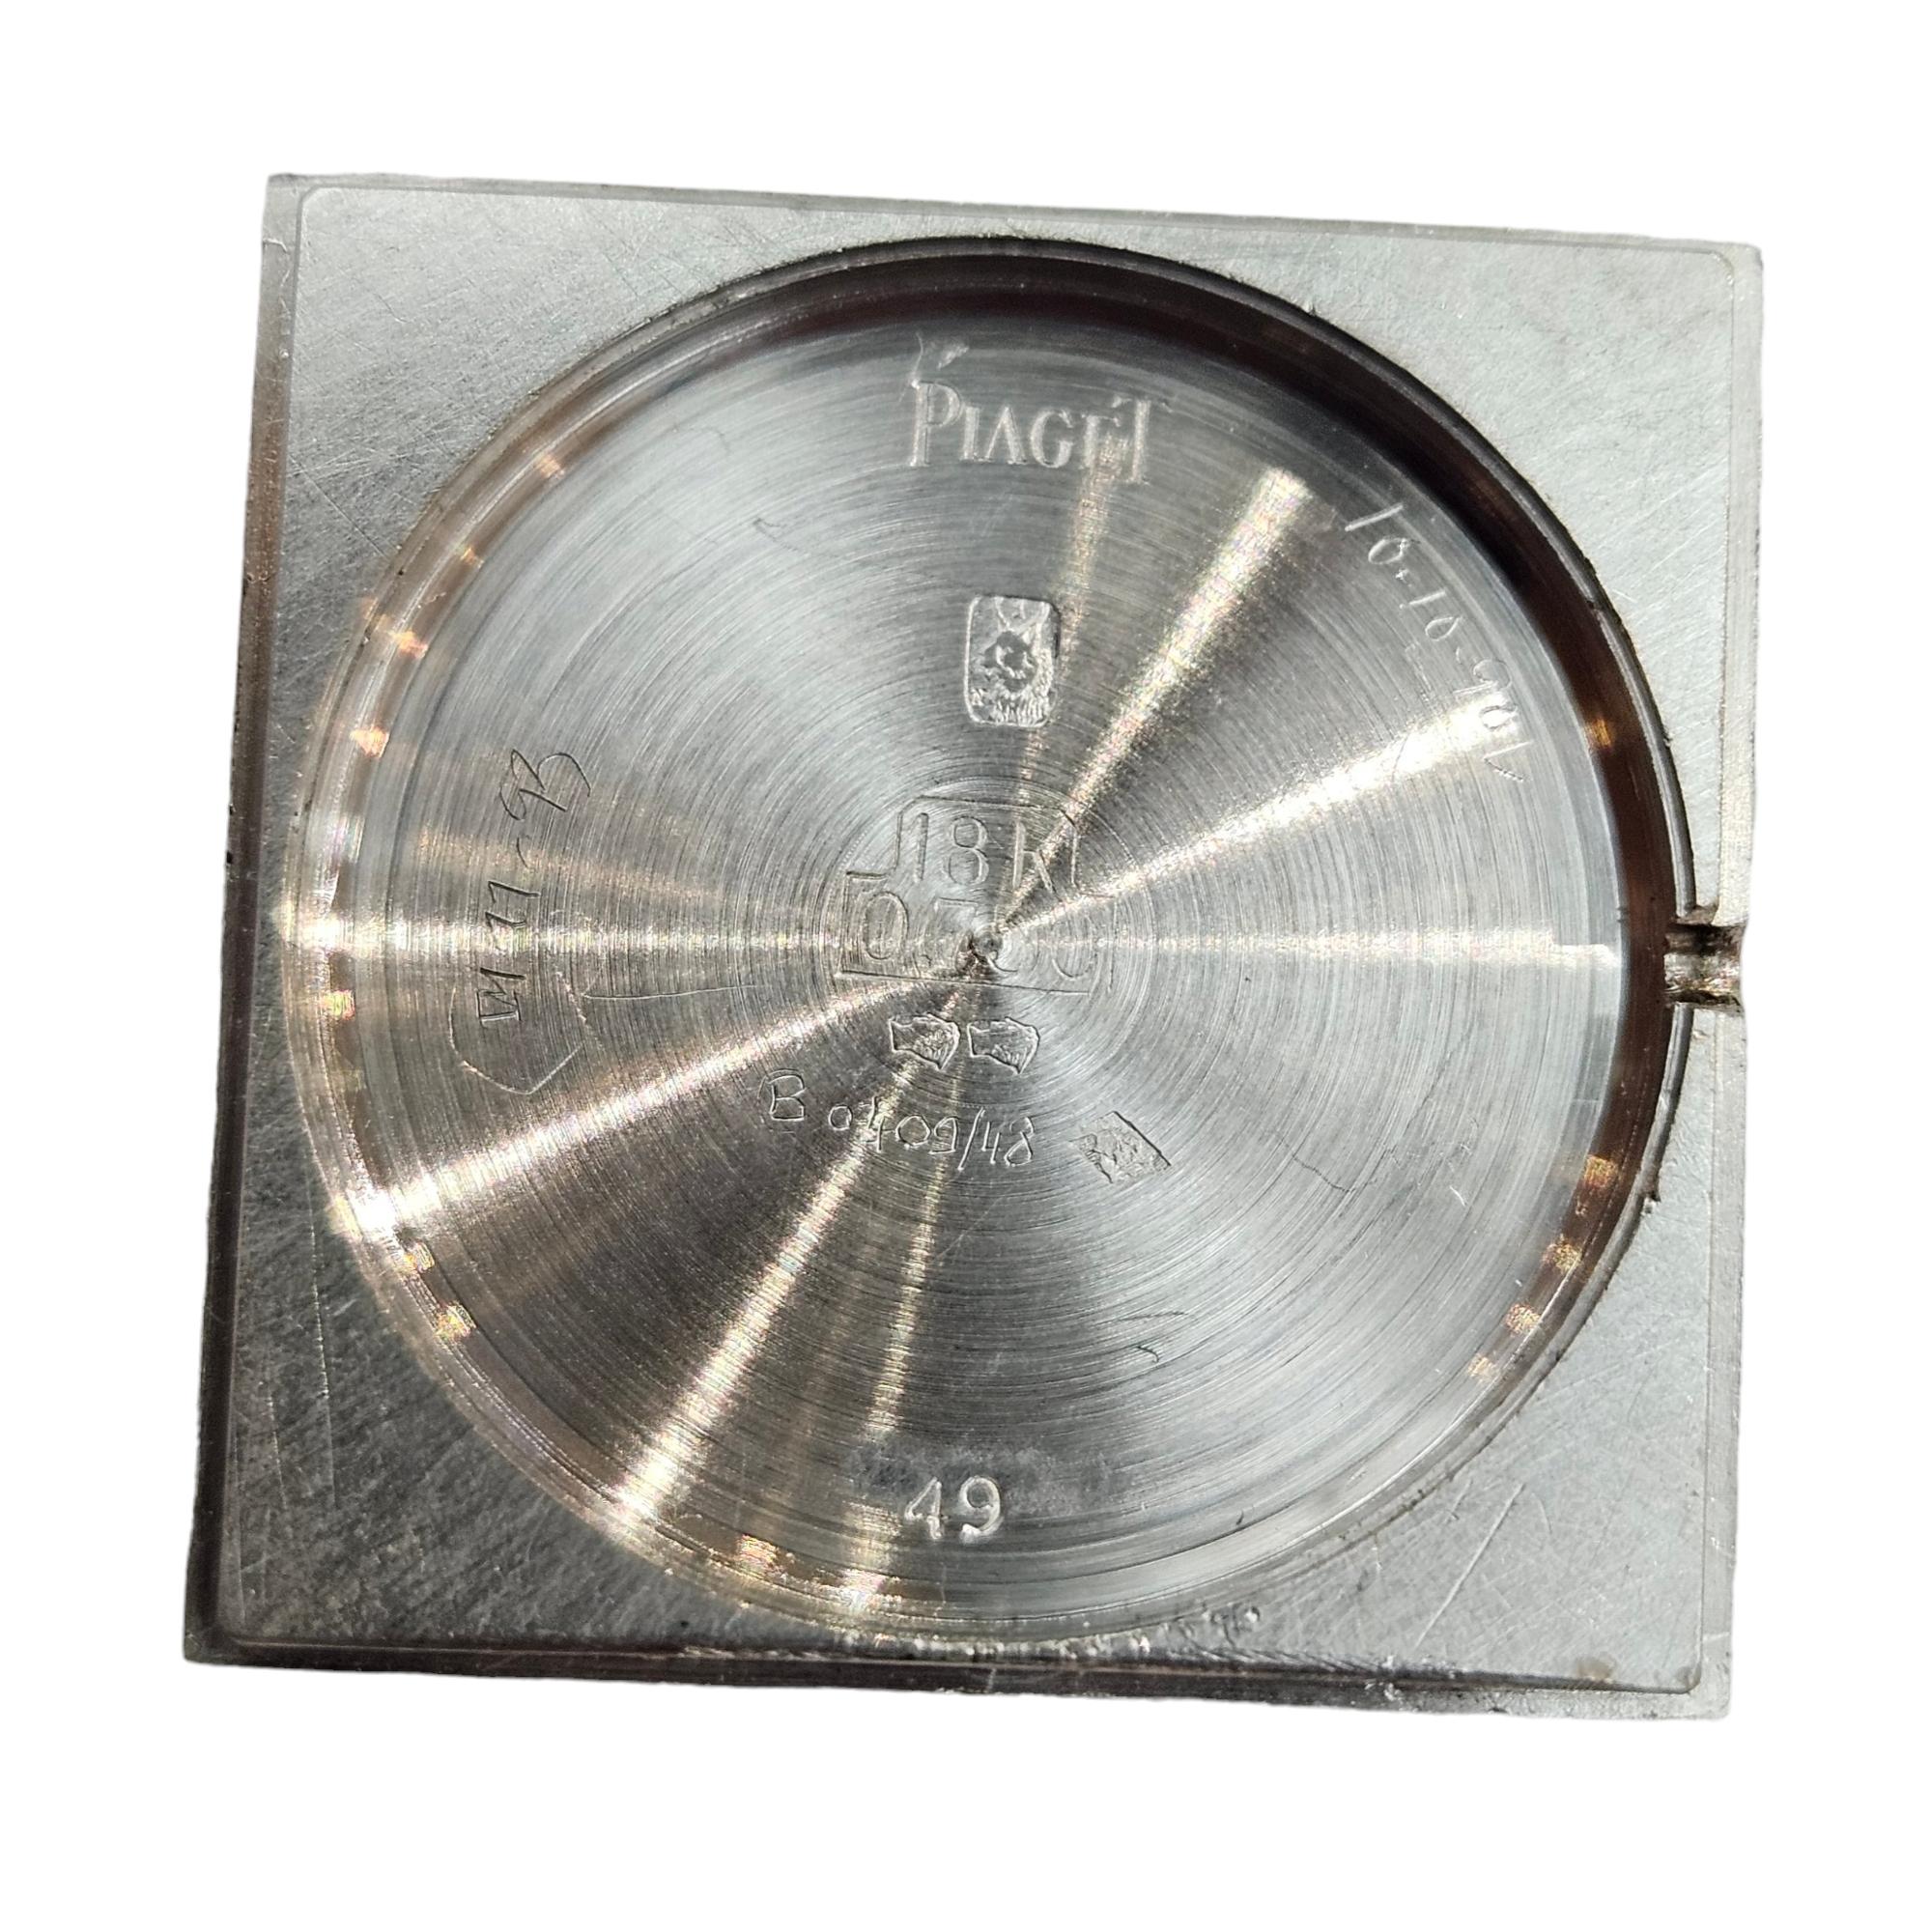 18 Kt White Gold Piaget Protocole Wrist Watch, Manual Winding For Sale 8